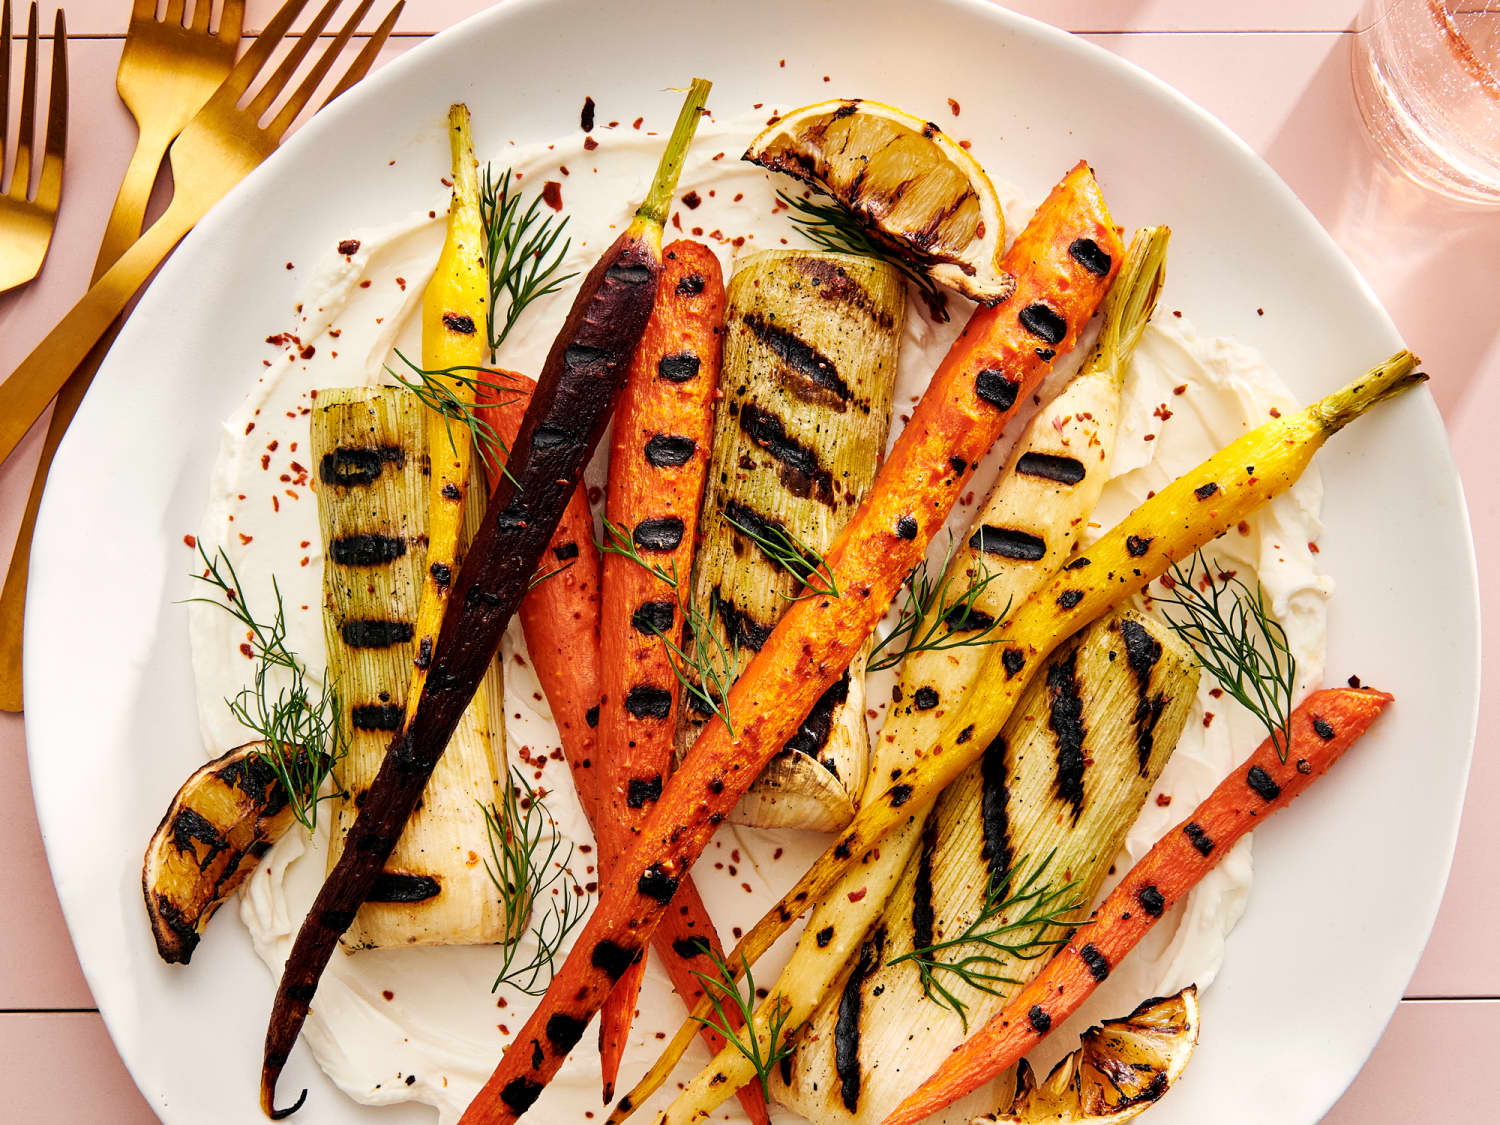 https://cdn.apartmenttherapy.info/image/upload/f_jpg,q_auto:eco,c_fill,g_auto,w_1500,ar_4:3/k%2FPhoto%2FRecipes%2F2022-08-grilled-carrots-and-leeks-with-labneh%2Fk-grilled-carrots-and-leeks-with-labneh